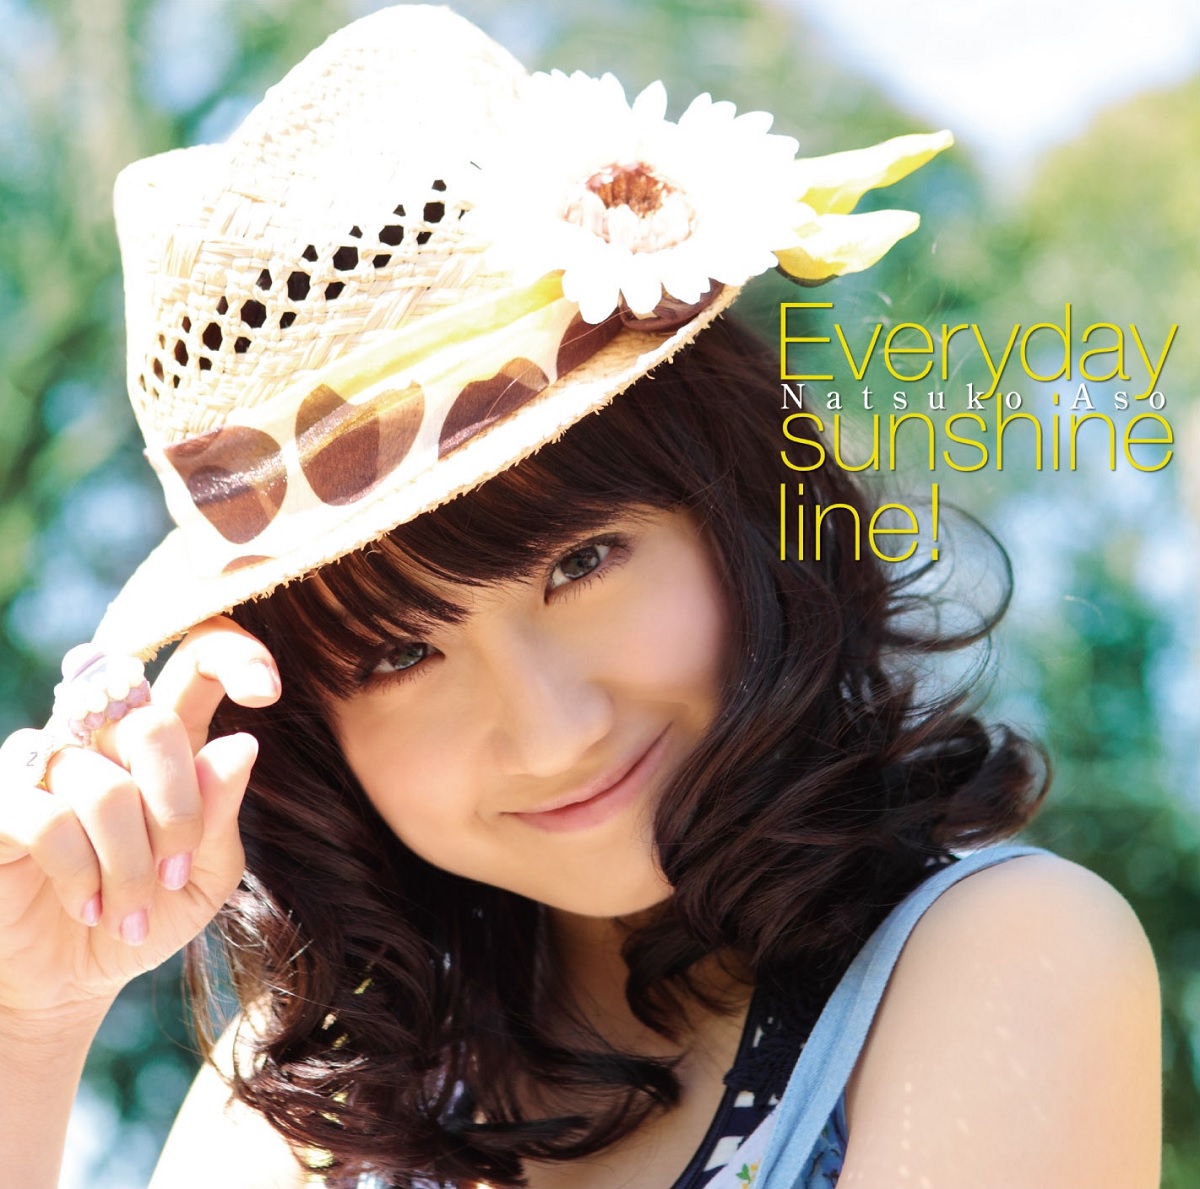 Cover art for『Natsuko Aso - Teardrop of Rain』from the release『Everyday sunshine line!』